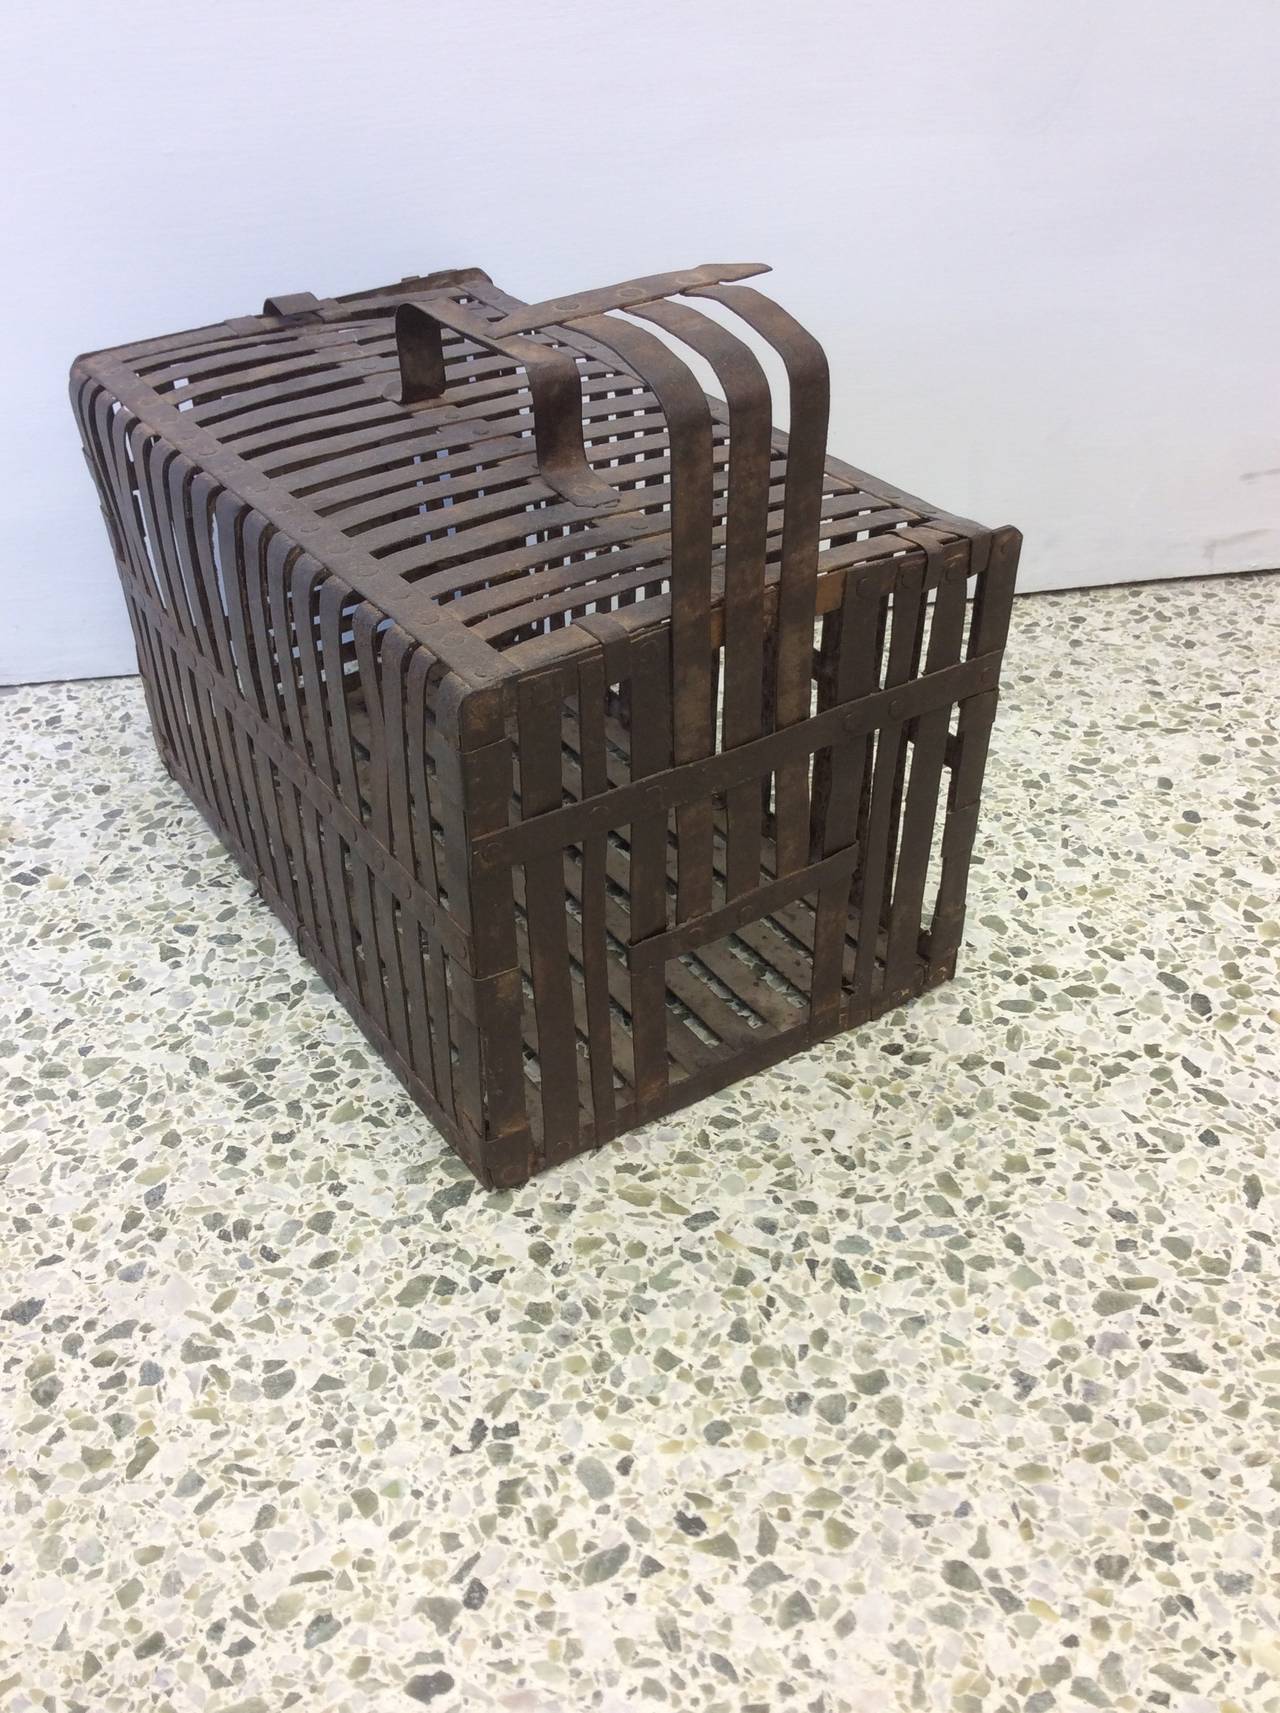 Unique metal mouse trap cage.
Door can be left open or closed.